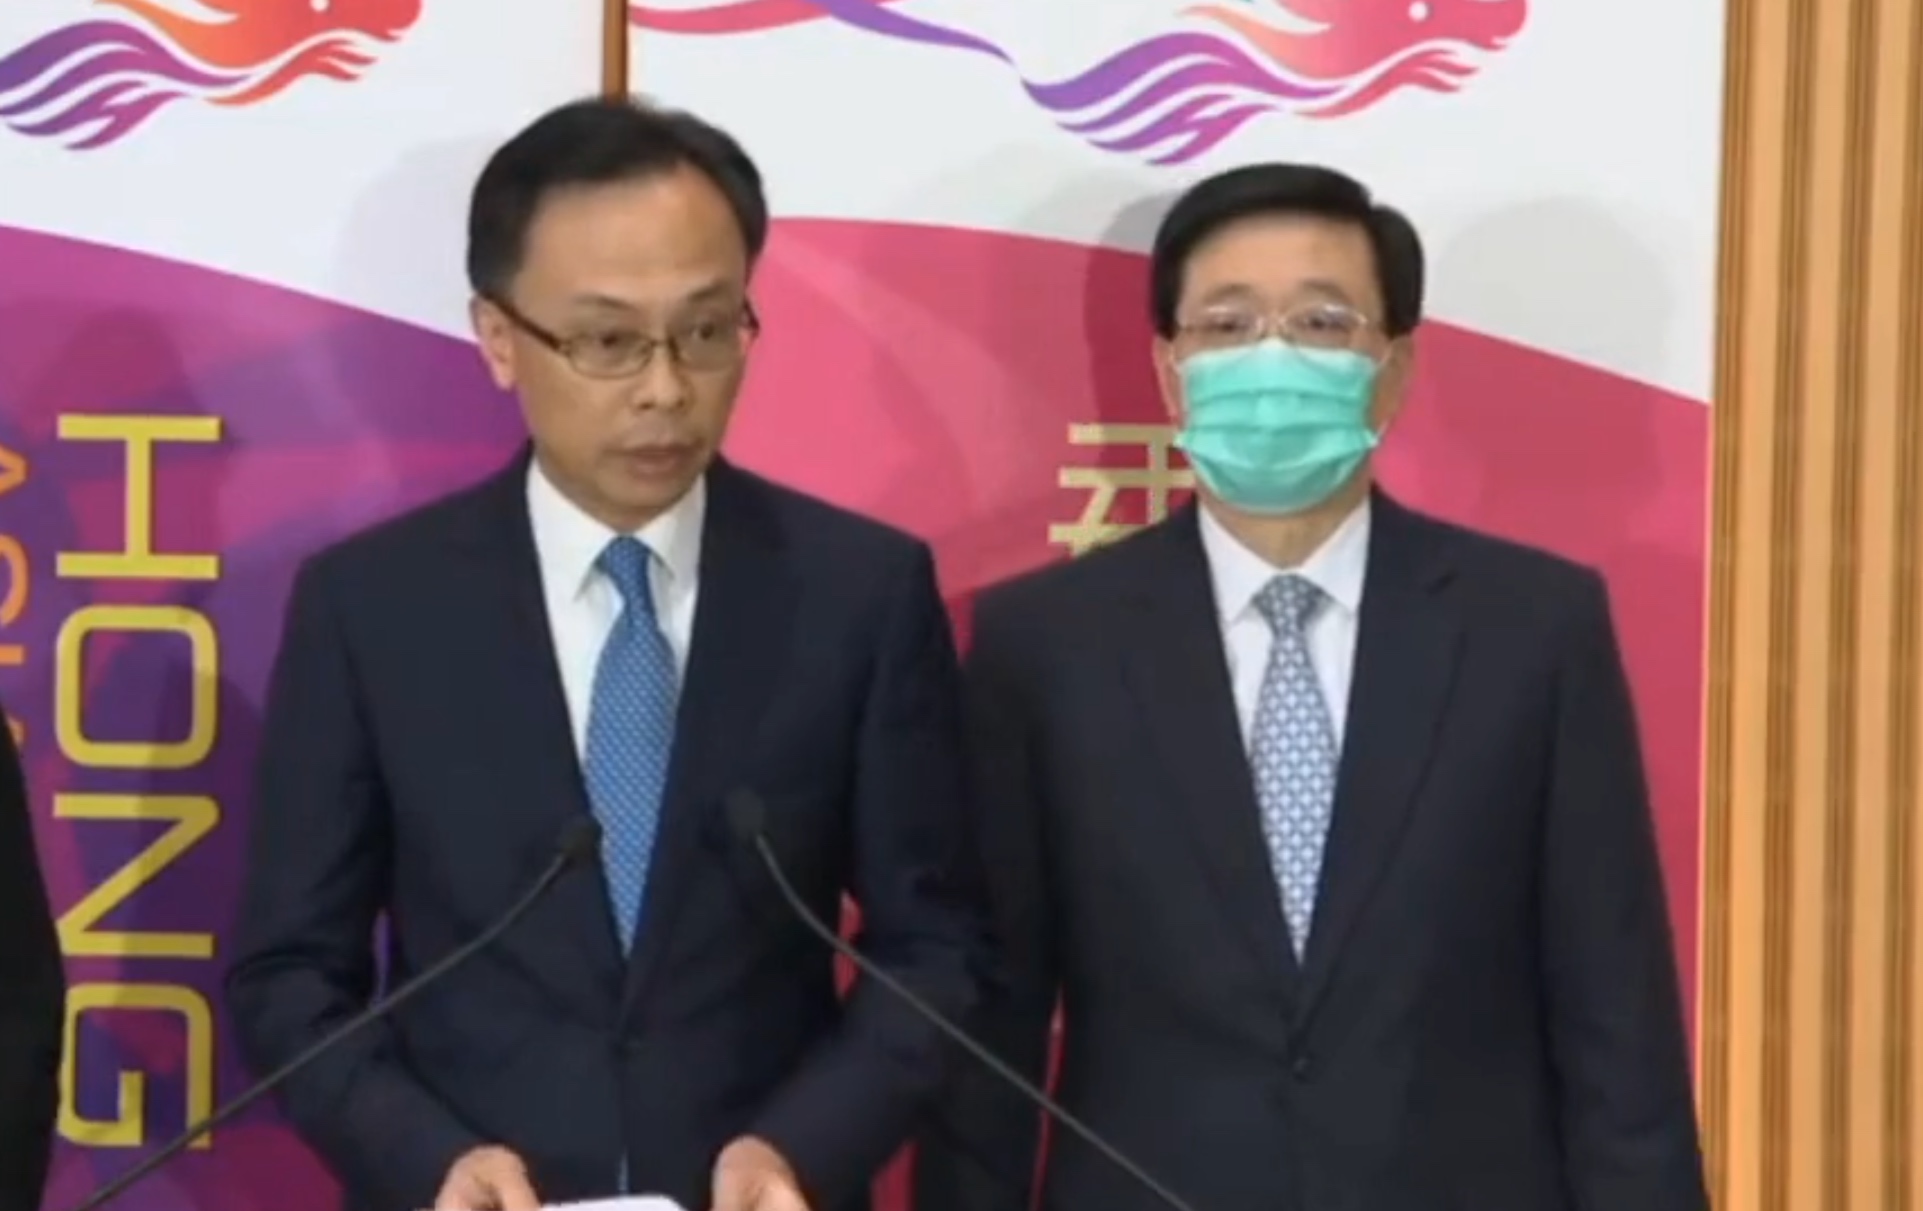 Patrick Nip (left), secretary for constitutional and mainland affairs, and Security Secretary John Lee (right) speak to the media about plans to repatriate Hongkongers stuck in the mainland’s Hubei province, epicenter of the coronavirus outbreak. Screengrab via Facebook.